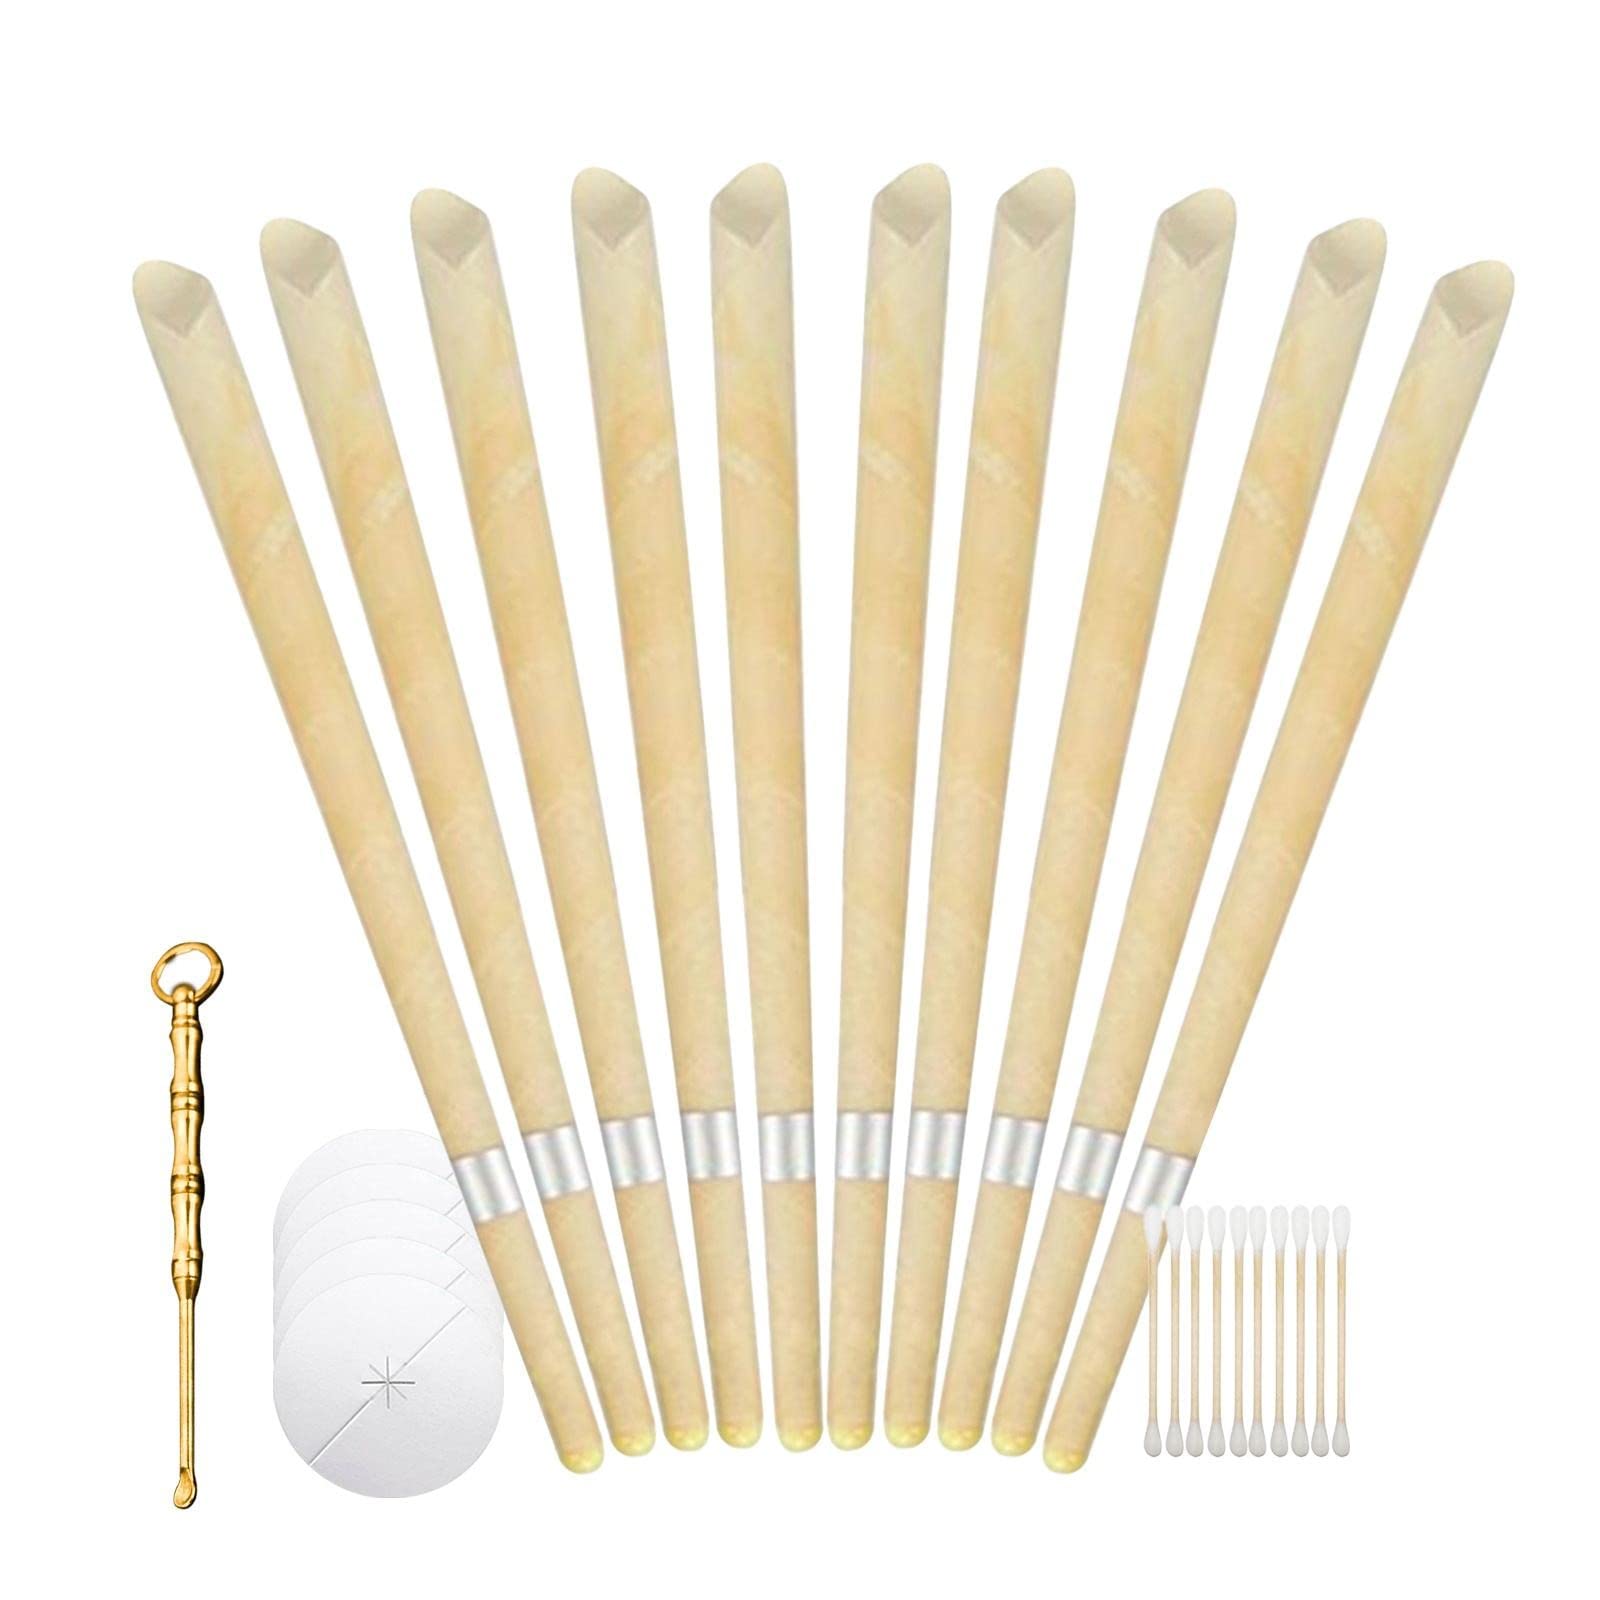 Beeswax Ear Wax Removal Candles, Set of 10 Ear Candles Wax Removal Ear Wax Removal Candles for Ear Cleaning Ear Candles Wax Removal Ear Candles for Ear Candling Wax Removal Ear Wax Removal for Adult